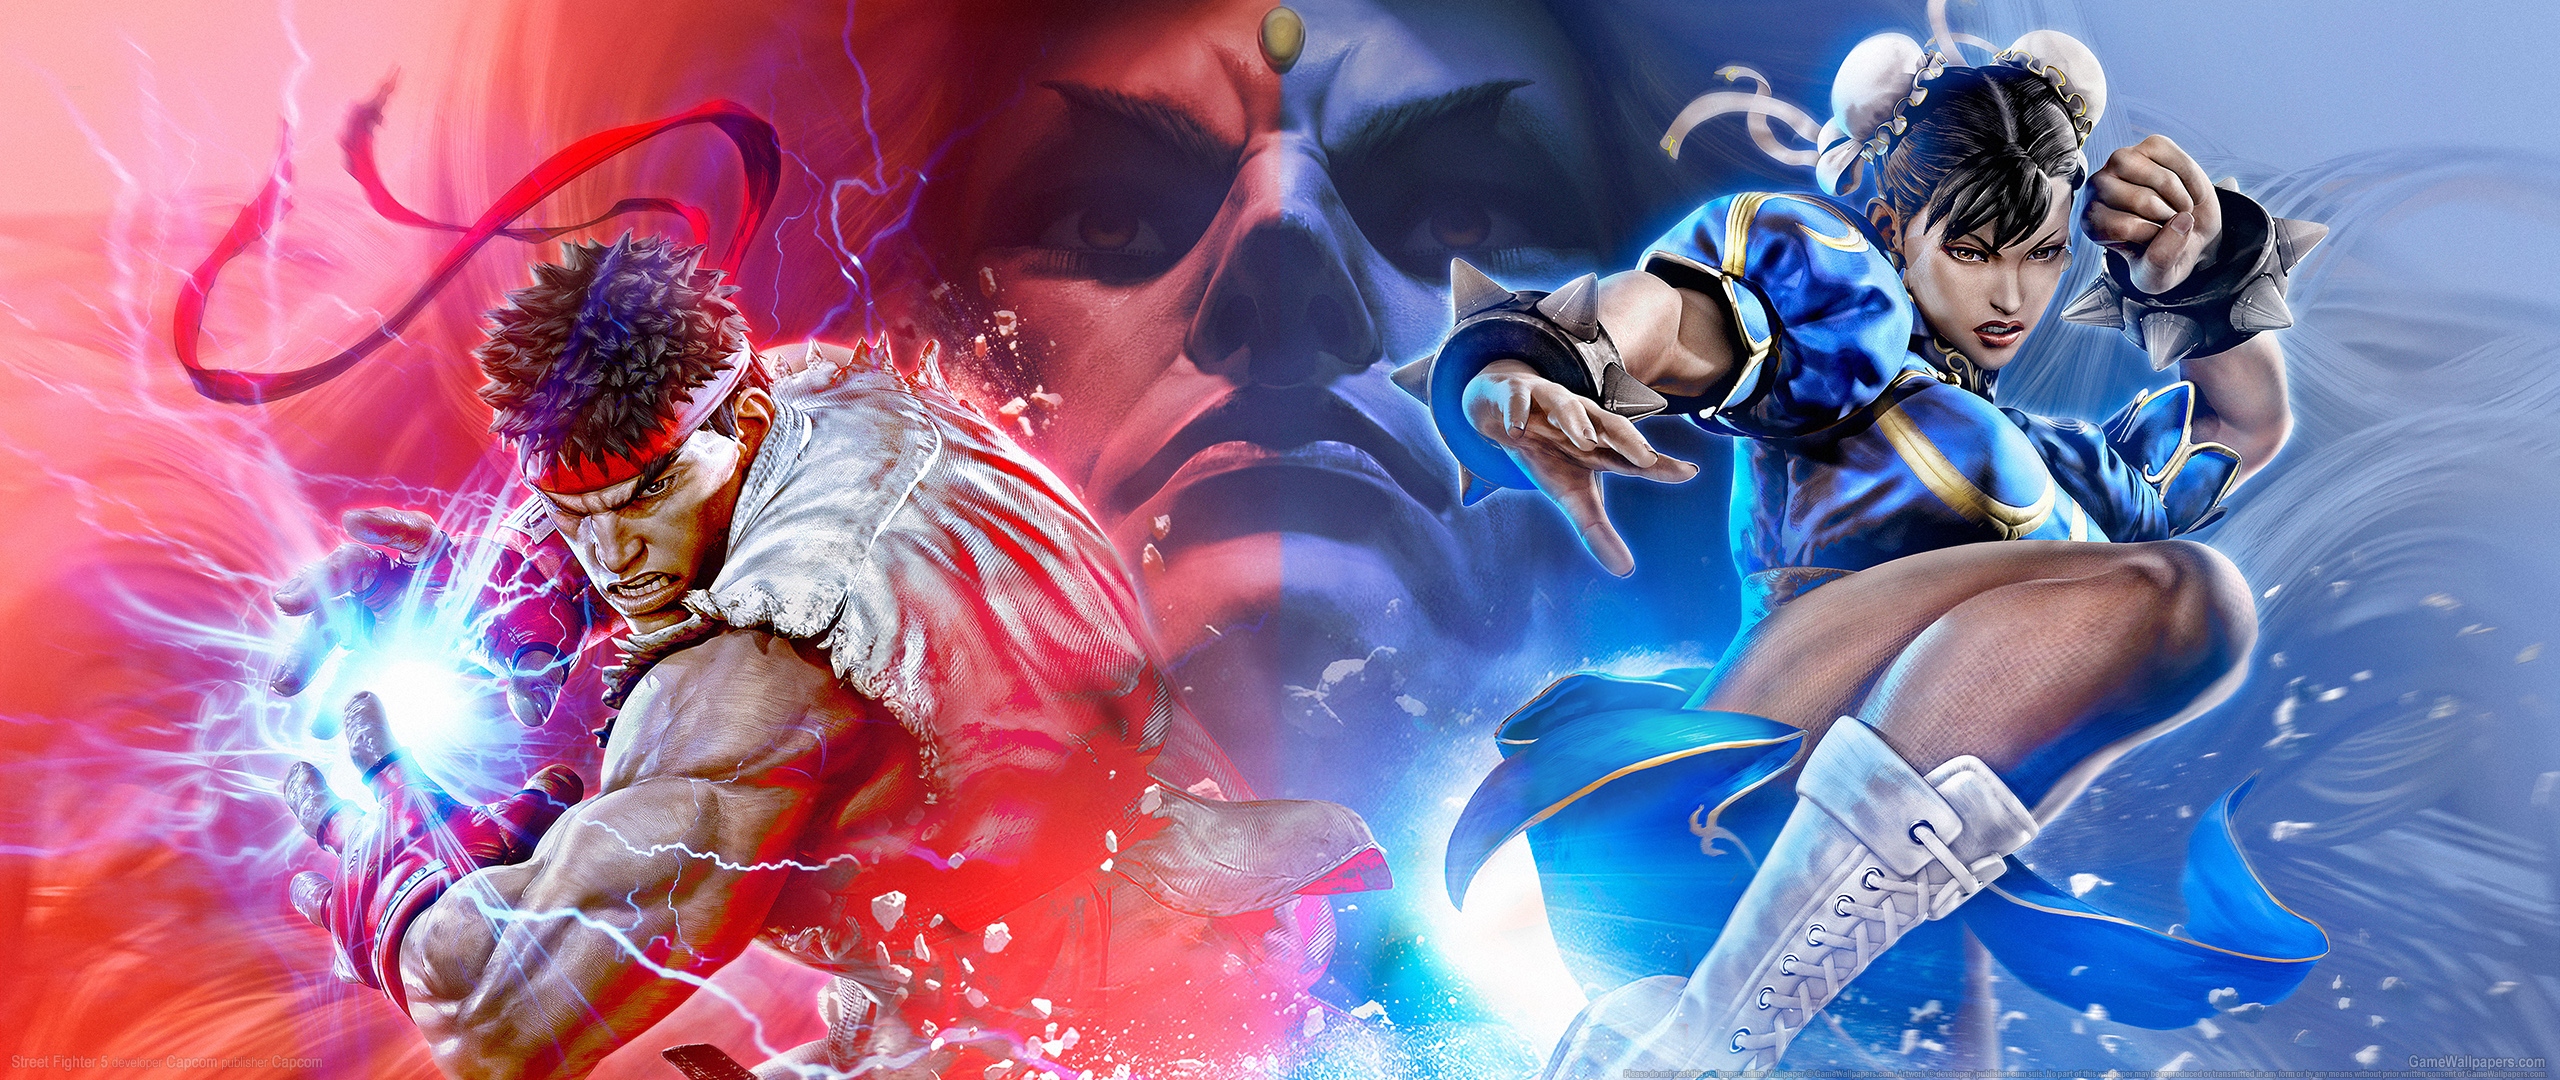 Street Fighter 5 2560x1080 wallpaper or background 08